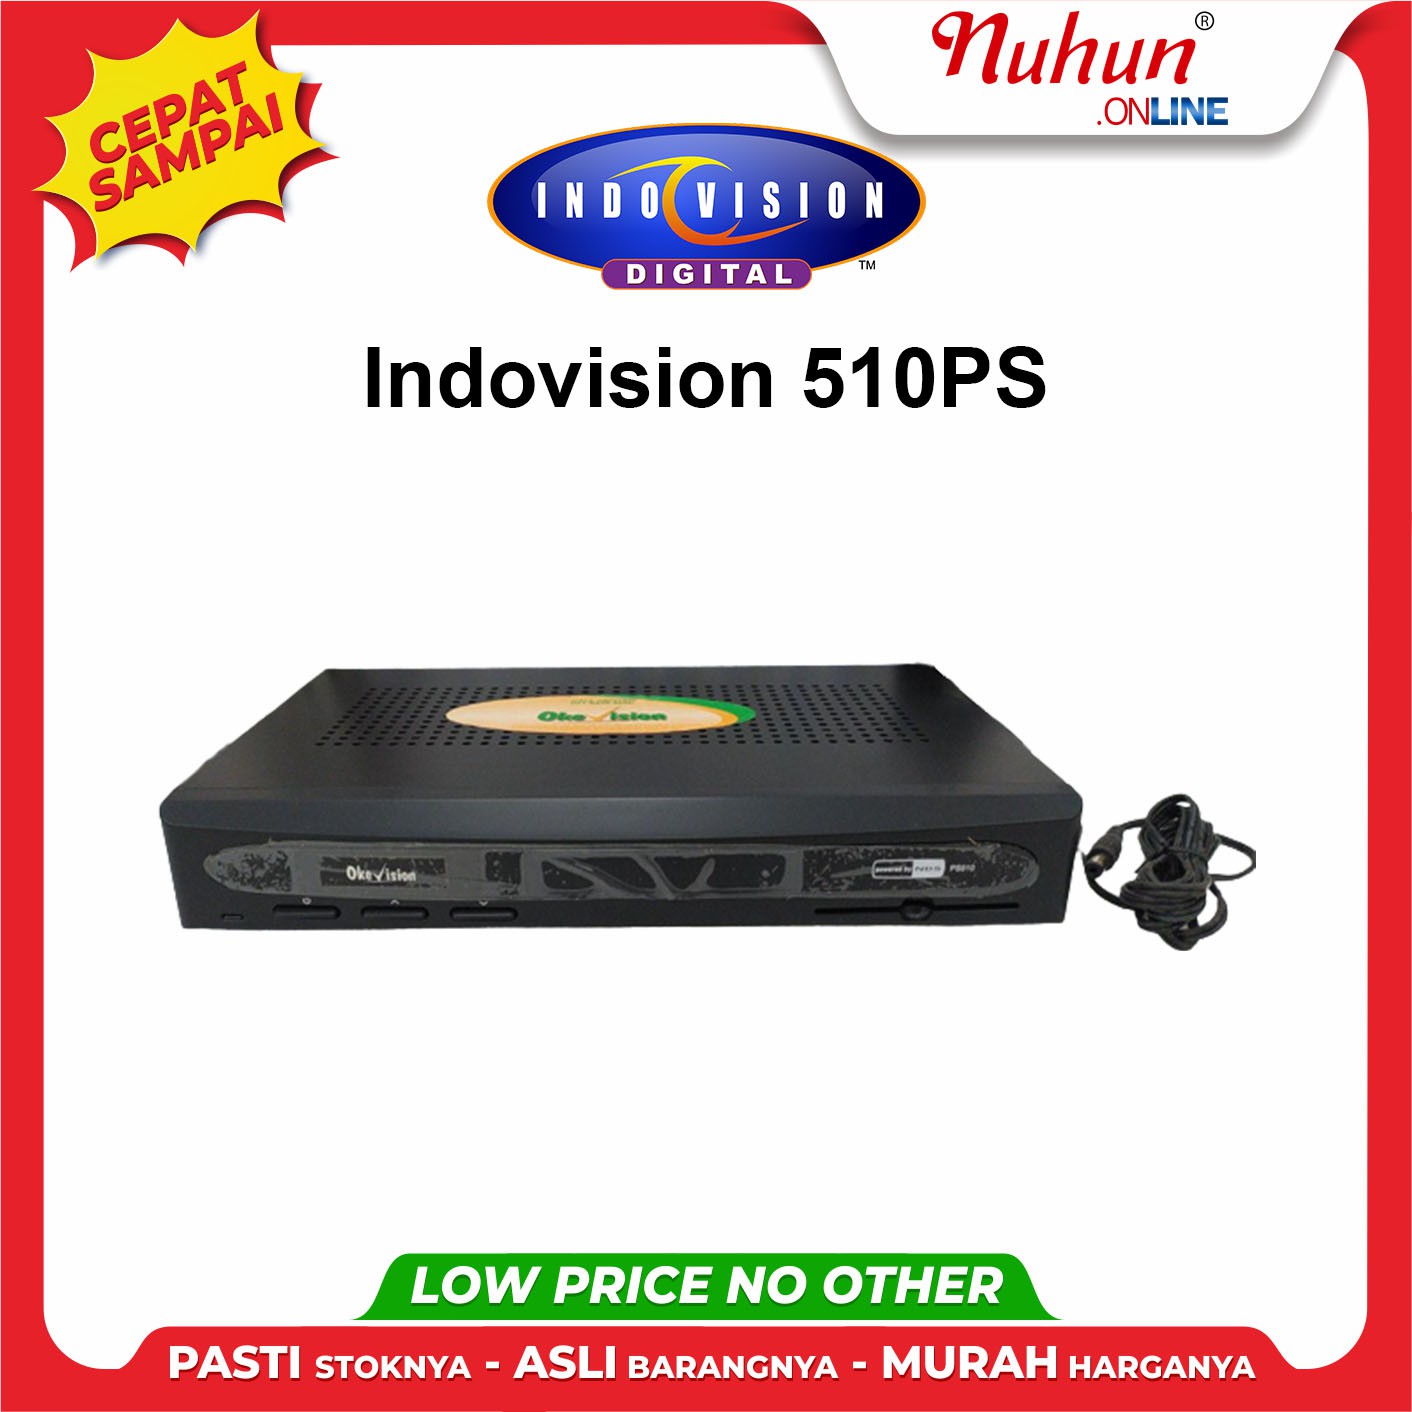 Indovision 510PS